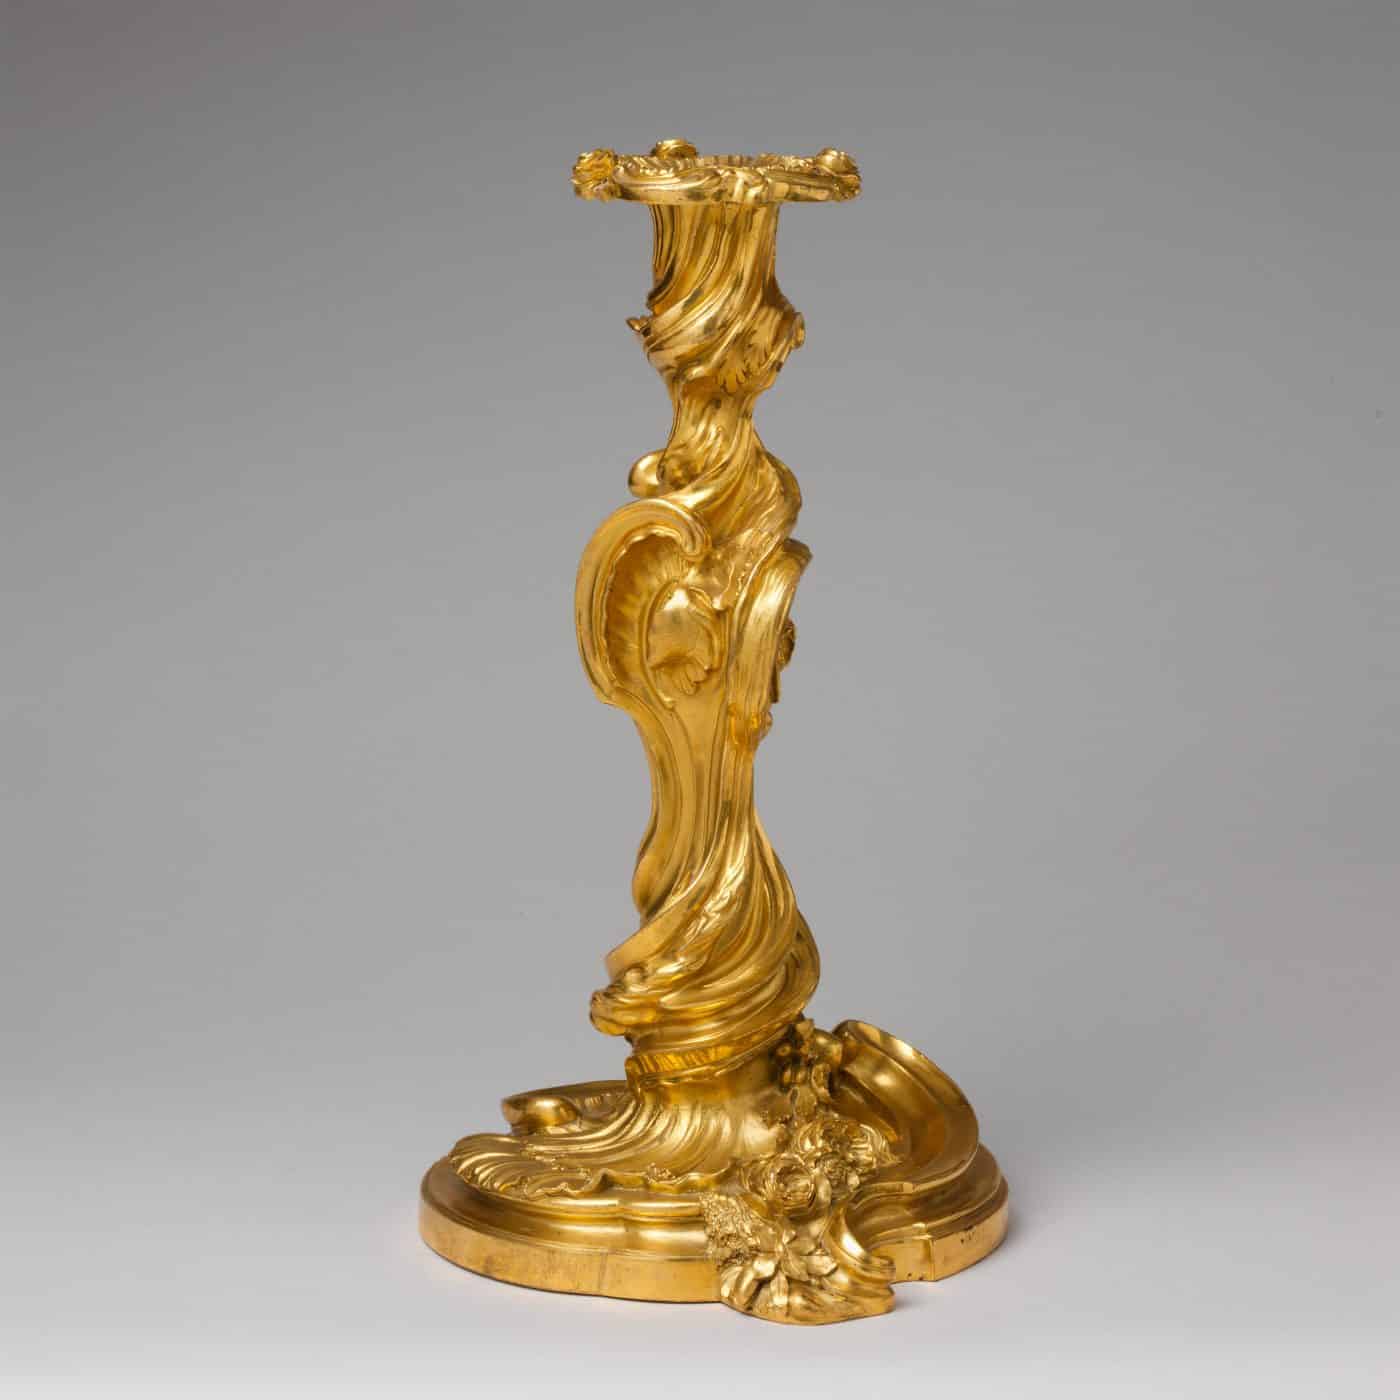 An 18th-century candlestick produced after a design by Juste-Aurèle Meissonnier